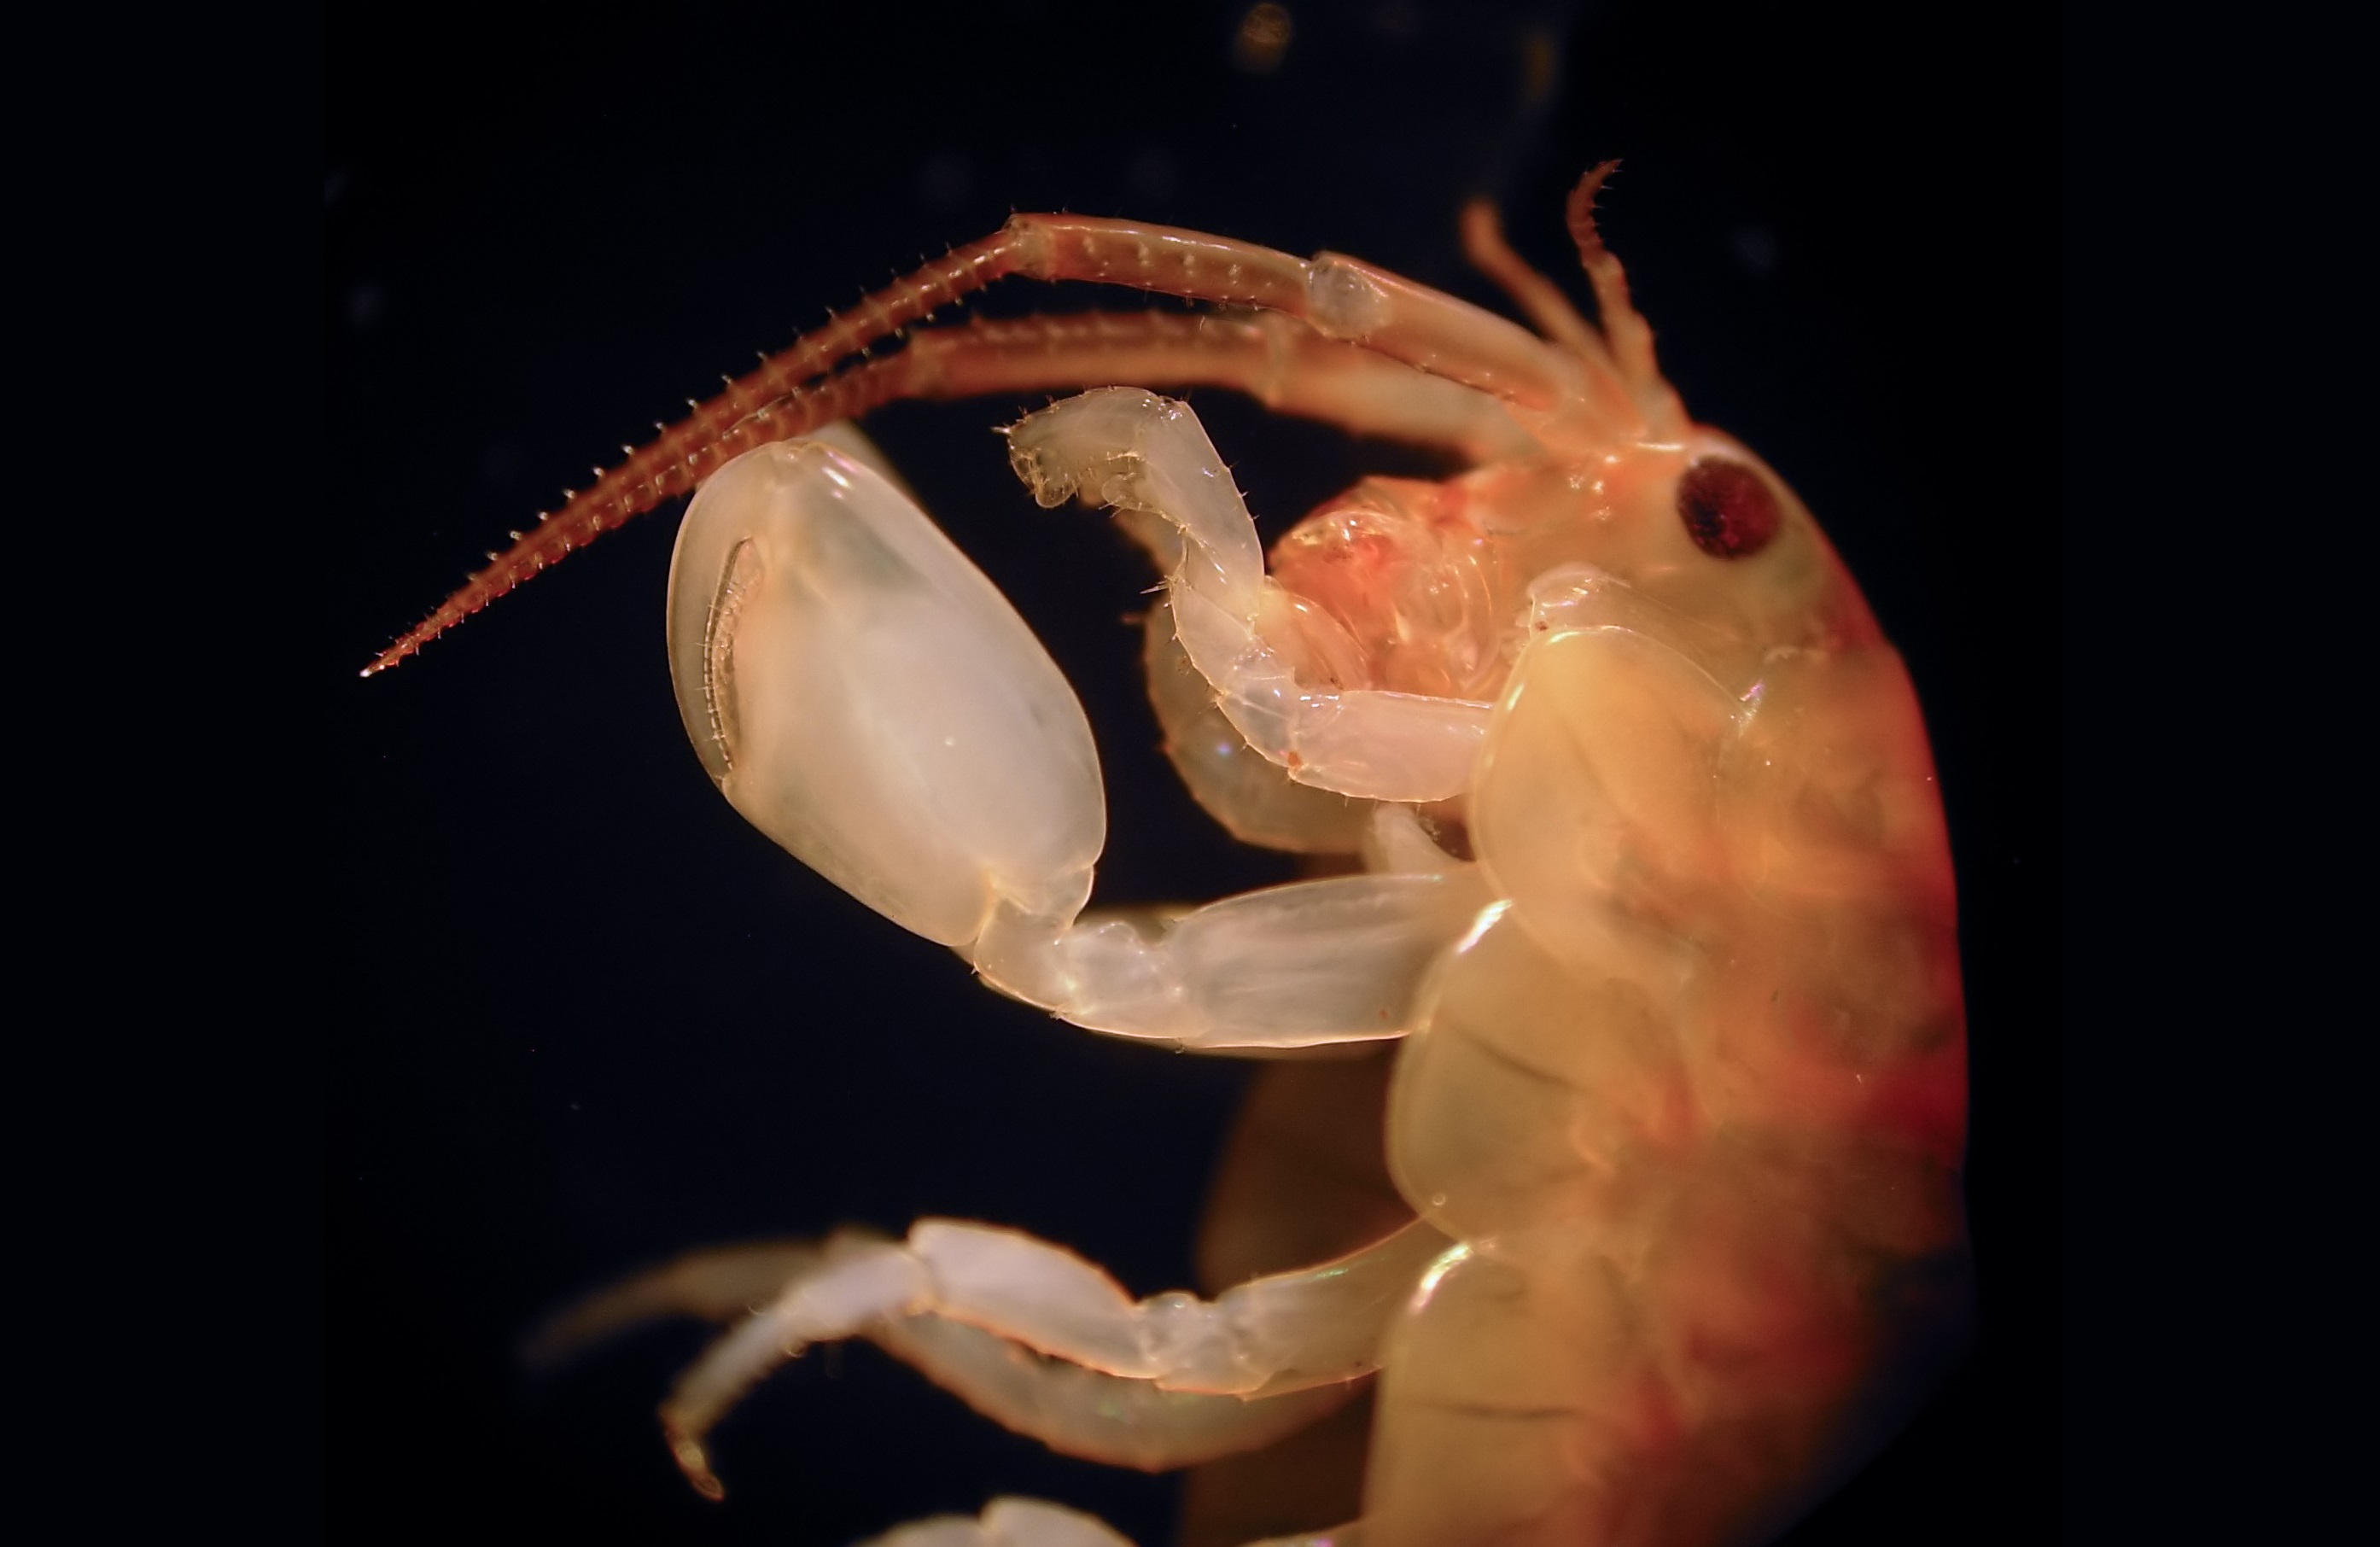 Ingestion and fragmentation of plastic carrier bags by the amphipod Orchestia gammarellus